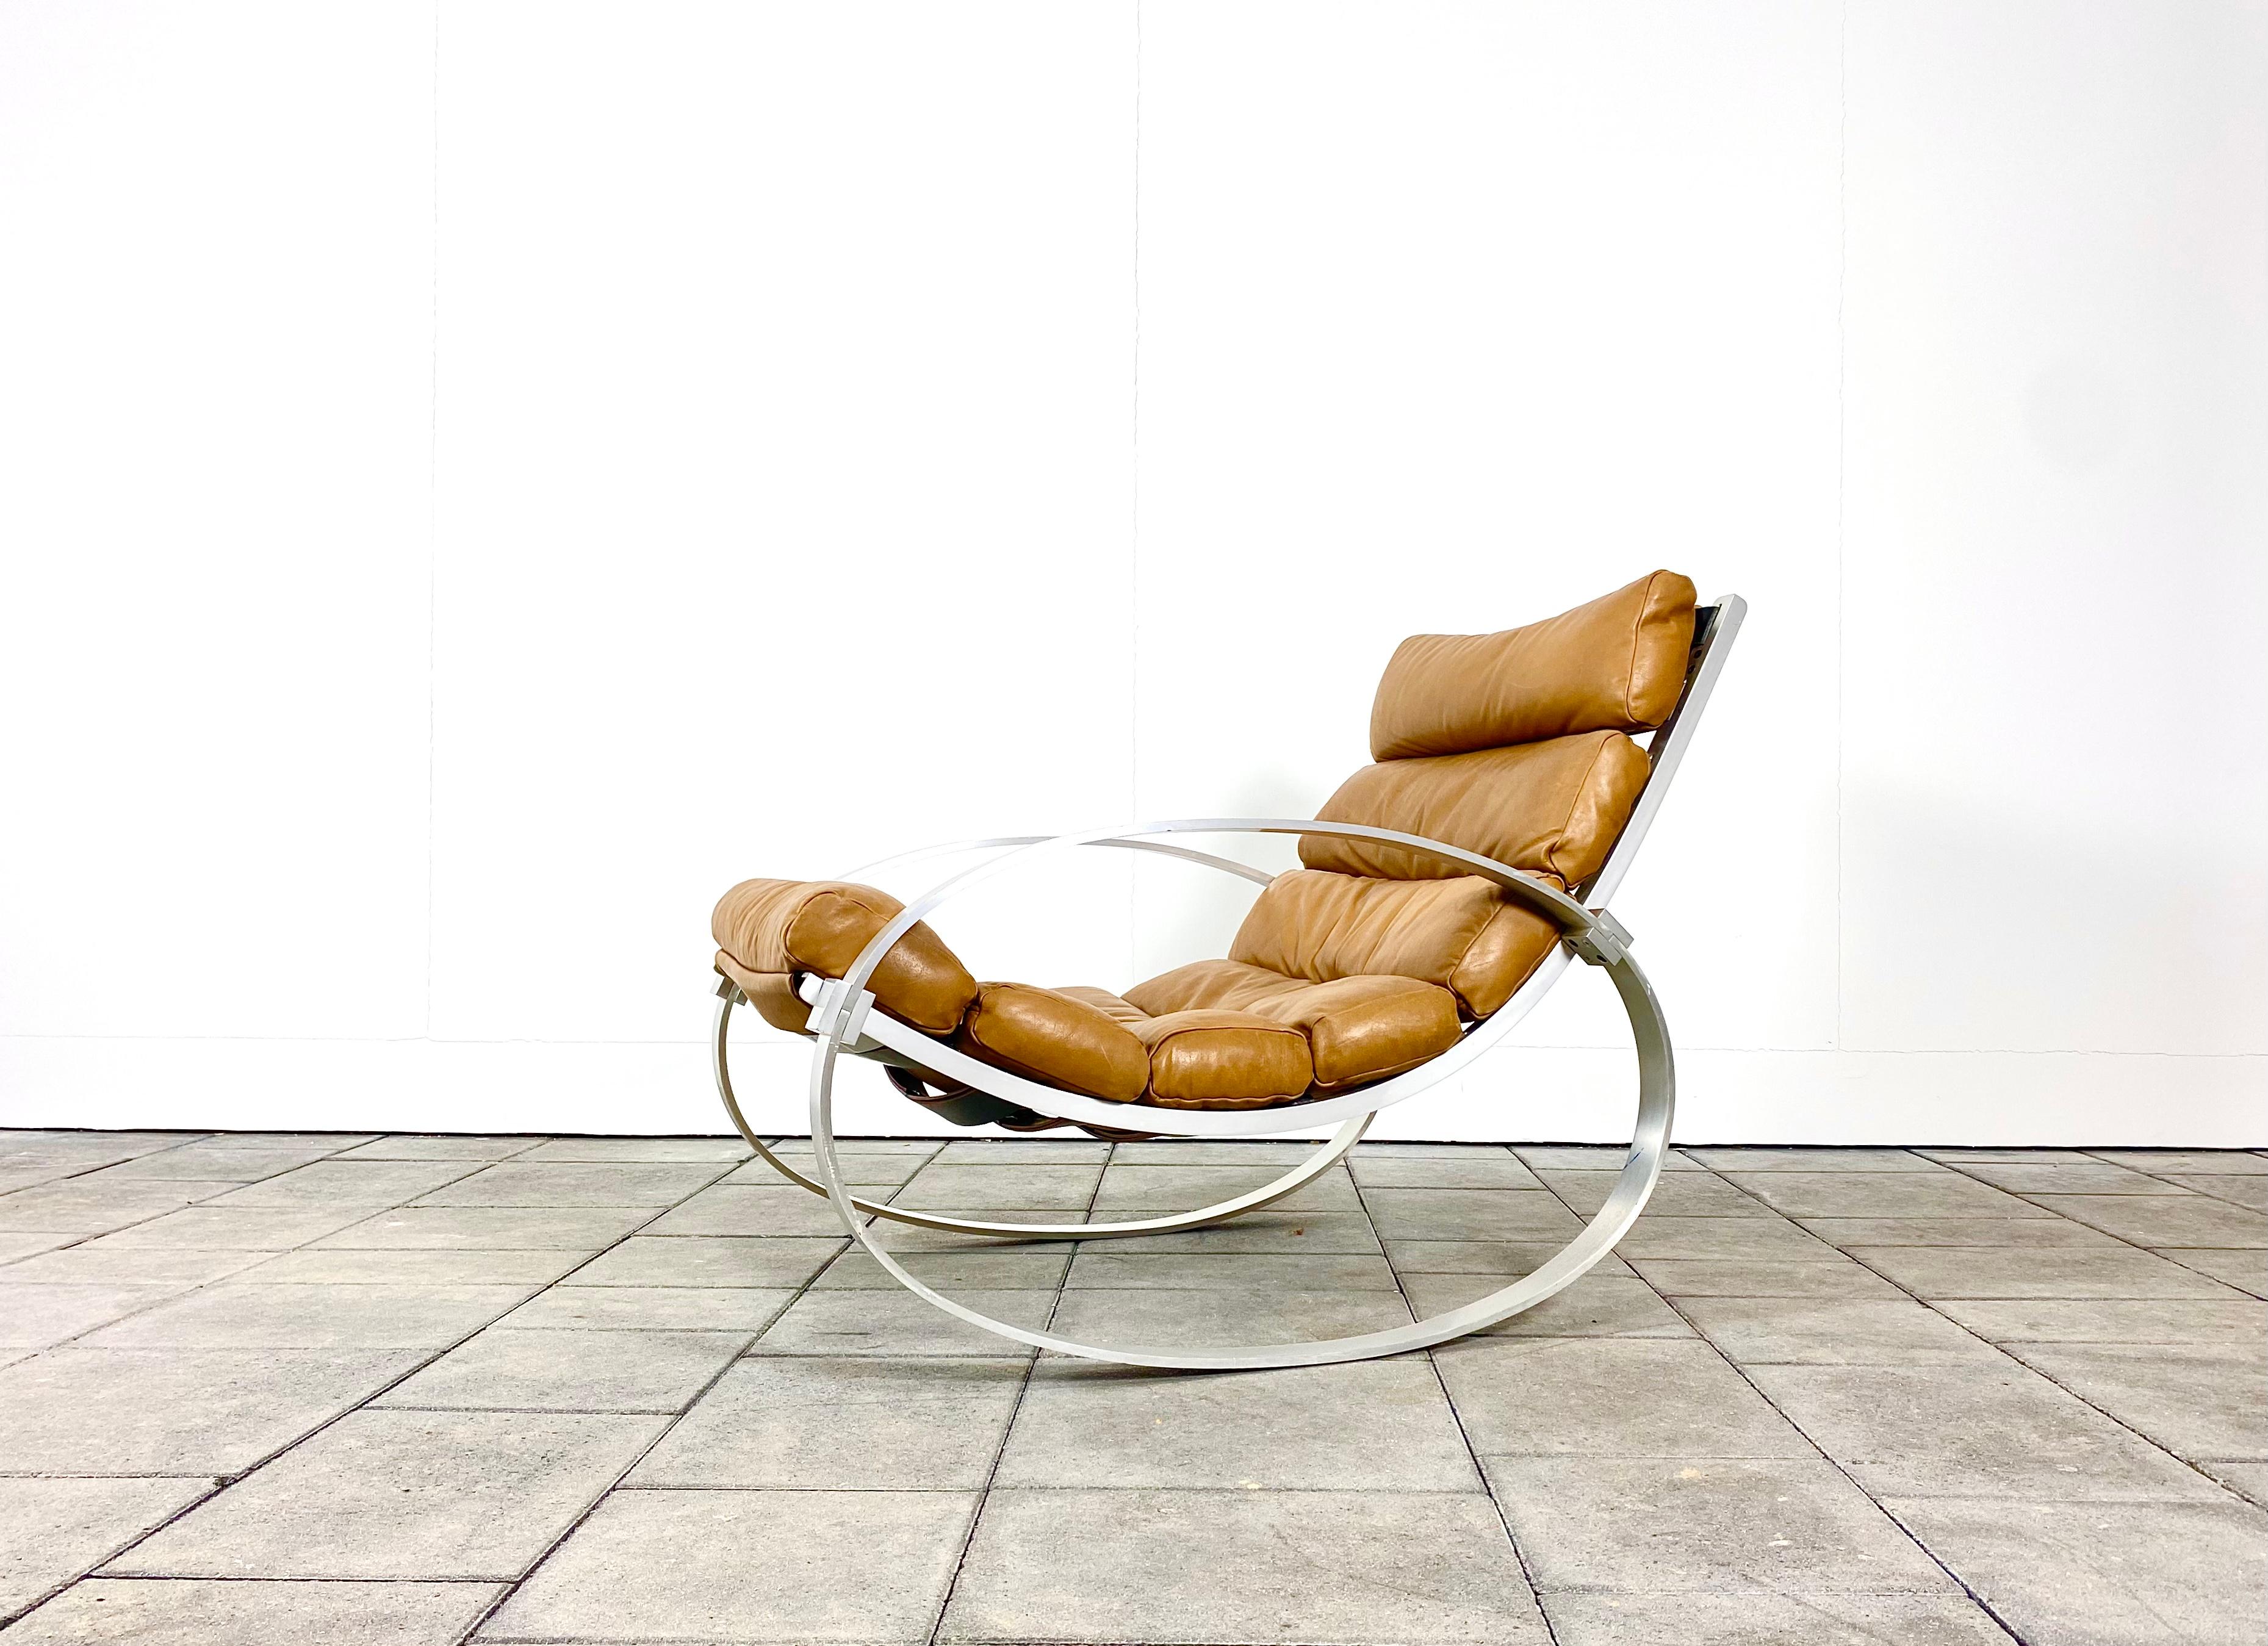 1970s Hans Kaufeld leather rocking chair, designed and manufactured by Hans Kaufeld, in Reda Weidenbrück, Germany.

Remarkable rocking chair by the well-reknown German Manufacturer Hans Kaufeld. The chair remains with its original tan-colored